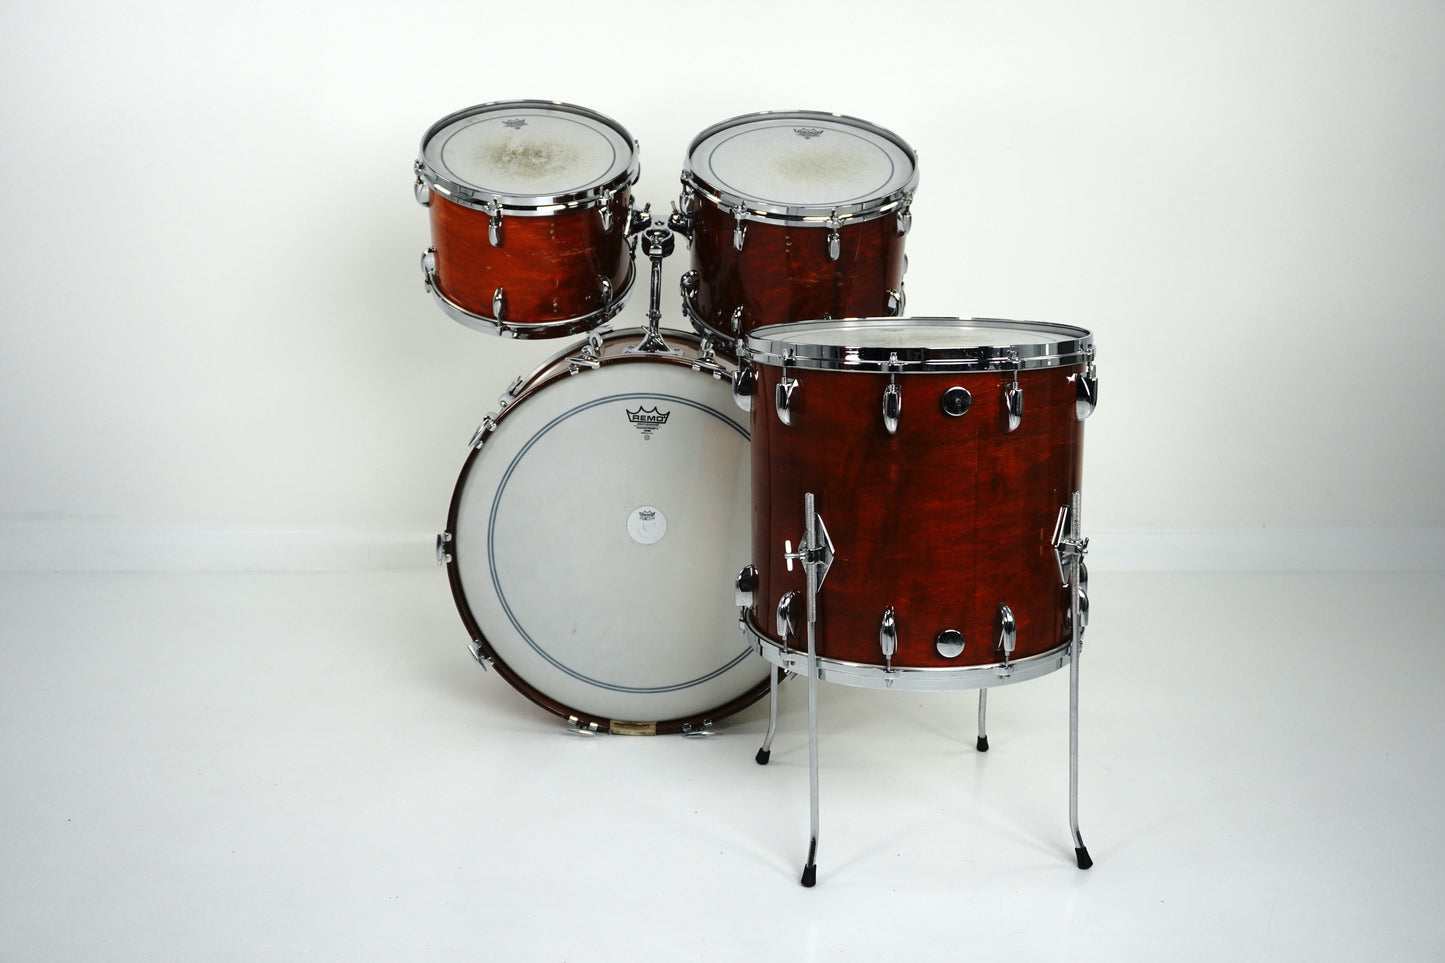 Gretsch USA ‘Stop Sign’ 4-Piece Kit in Rosewood